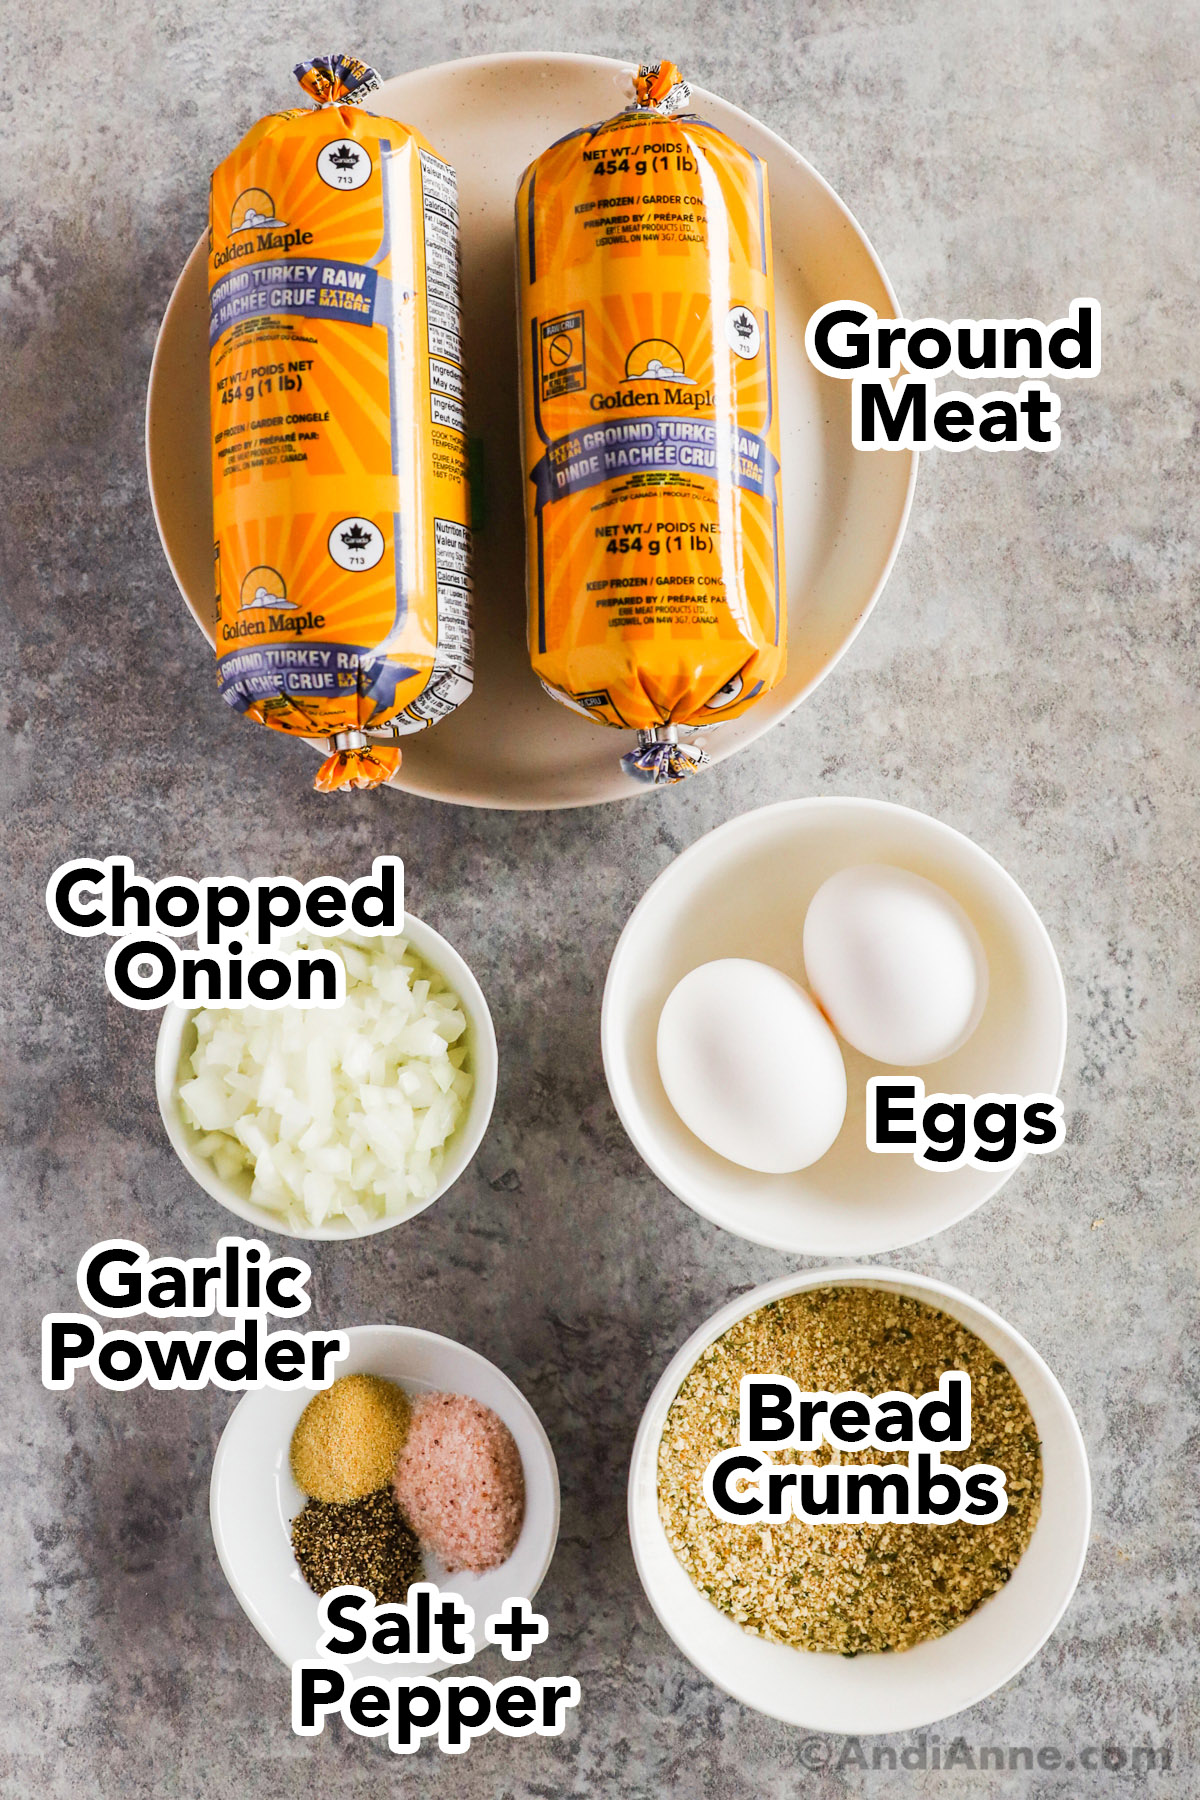 Recipe ingredients including tubes of ground turkey, bowls of chopped onion, bread crumbs, eggs and spices.